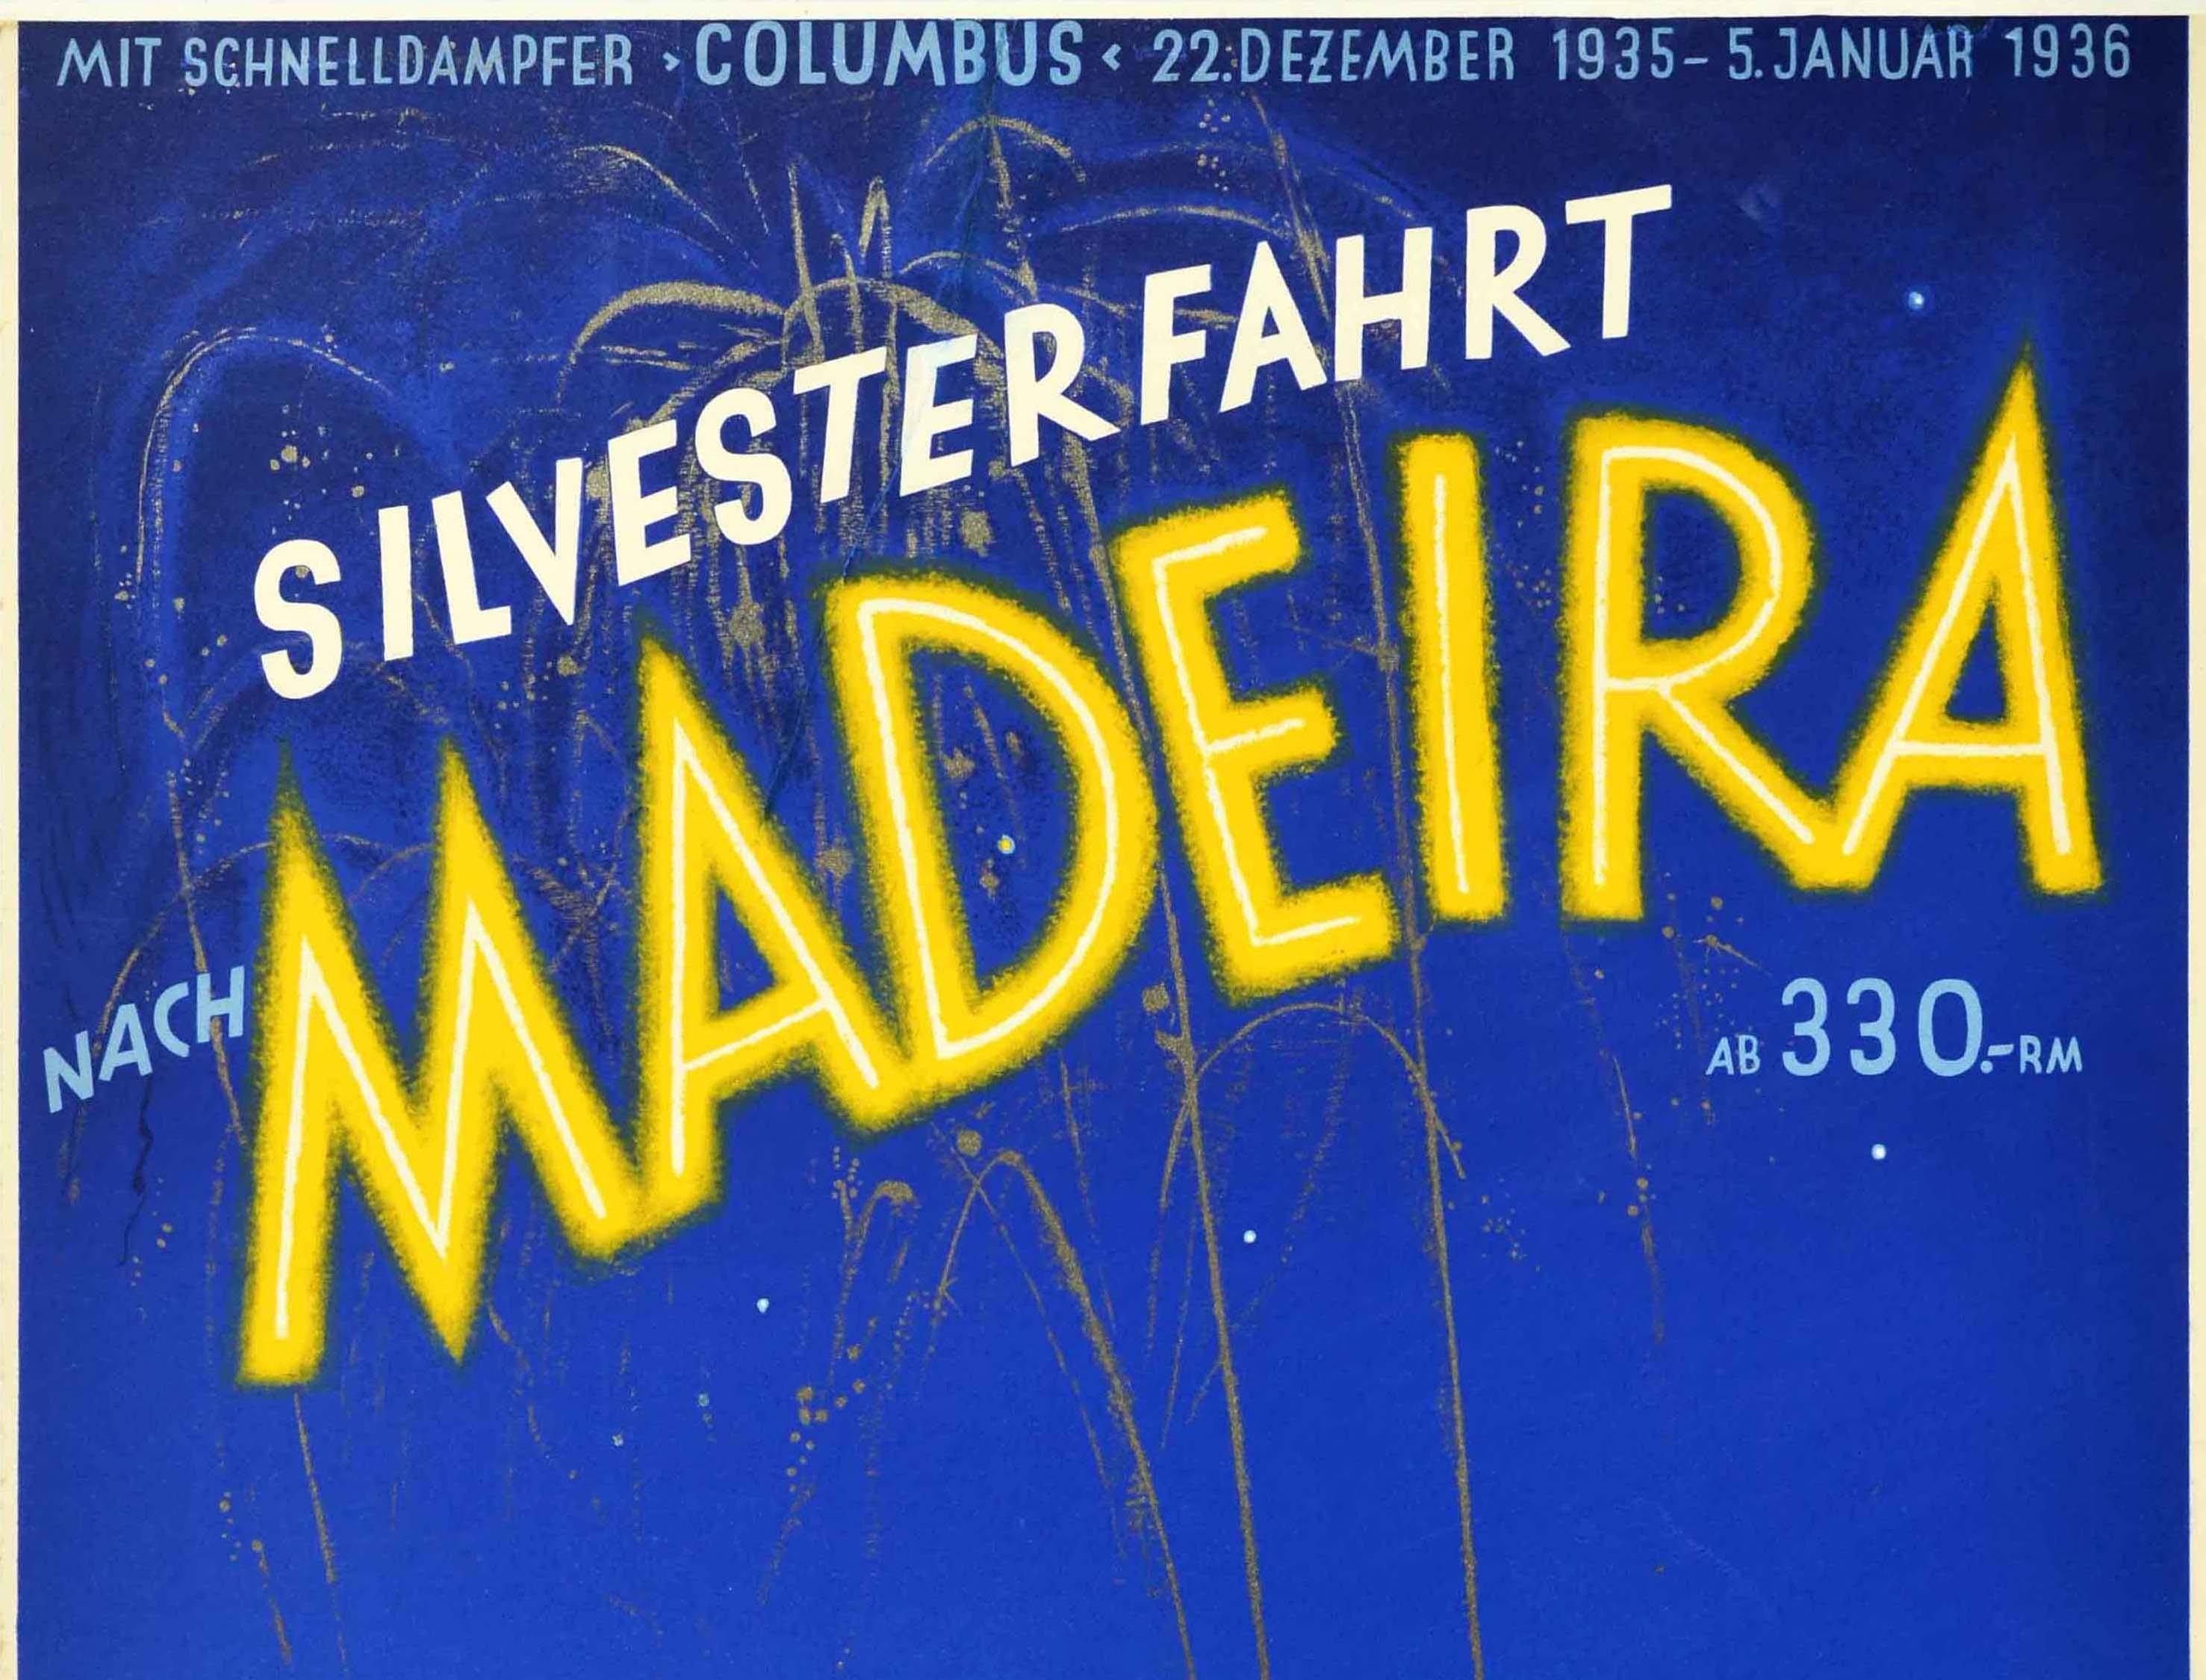 Original Vintage Poster New Year Cruise To Madeira Steamship Columbus Fireworks - Print by Kuck